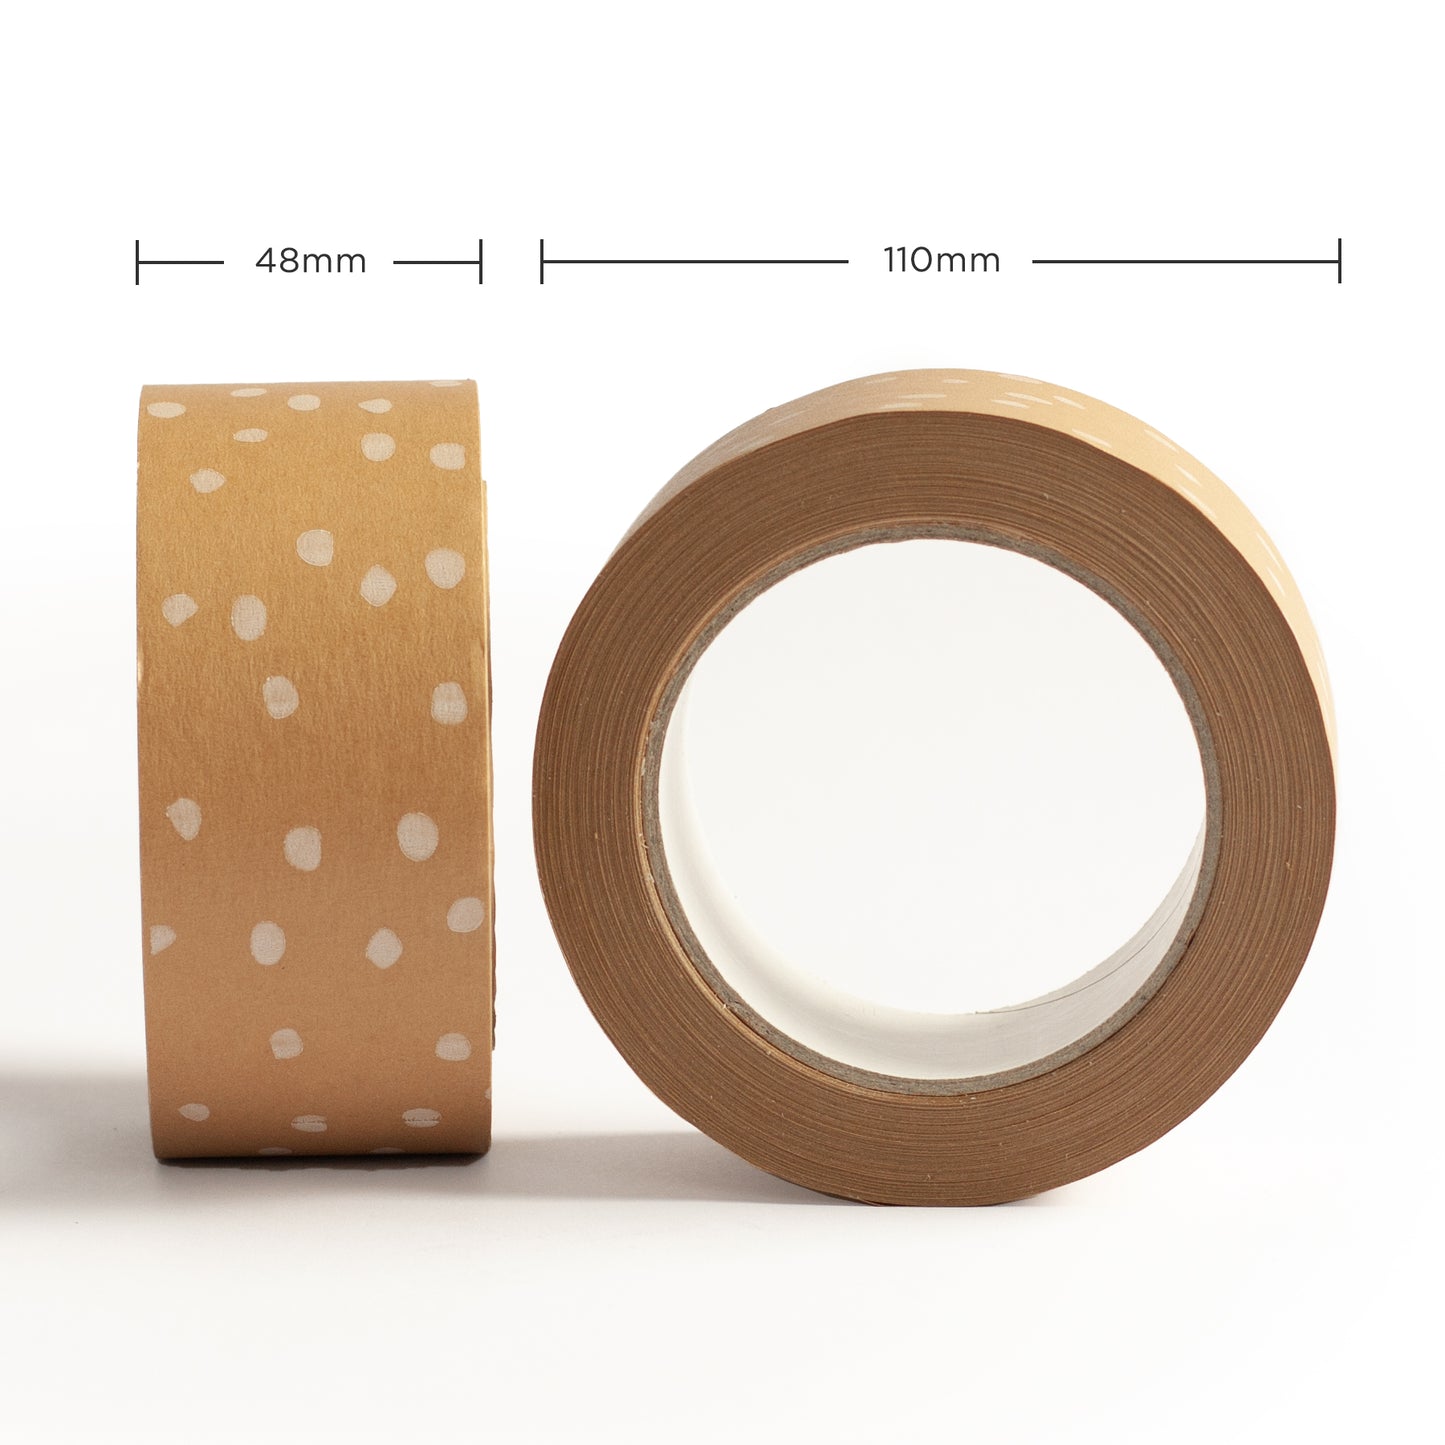 Decorative Paper Tapes, Recycled Paper Packing Tape any 6 of your choice, 50 metres length, 48mm width